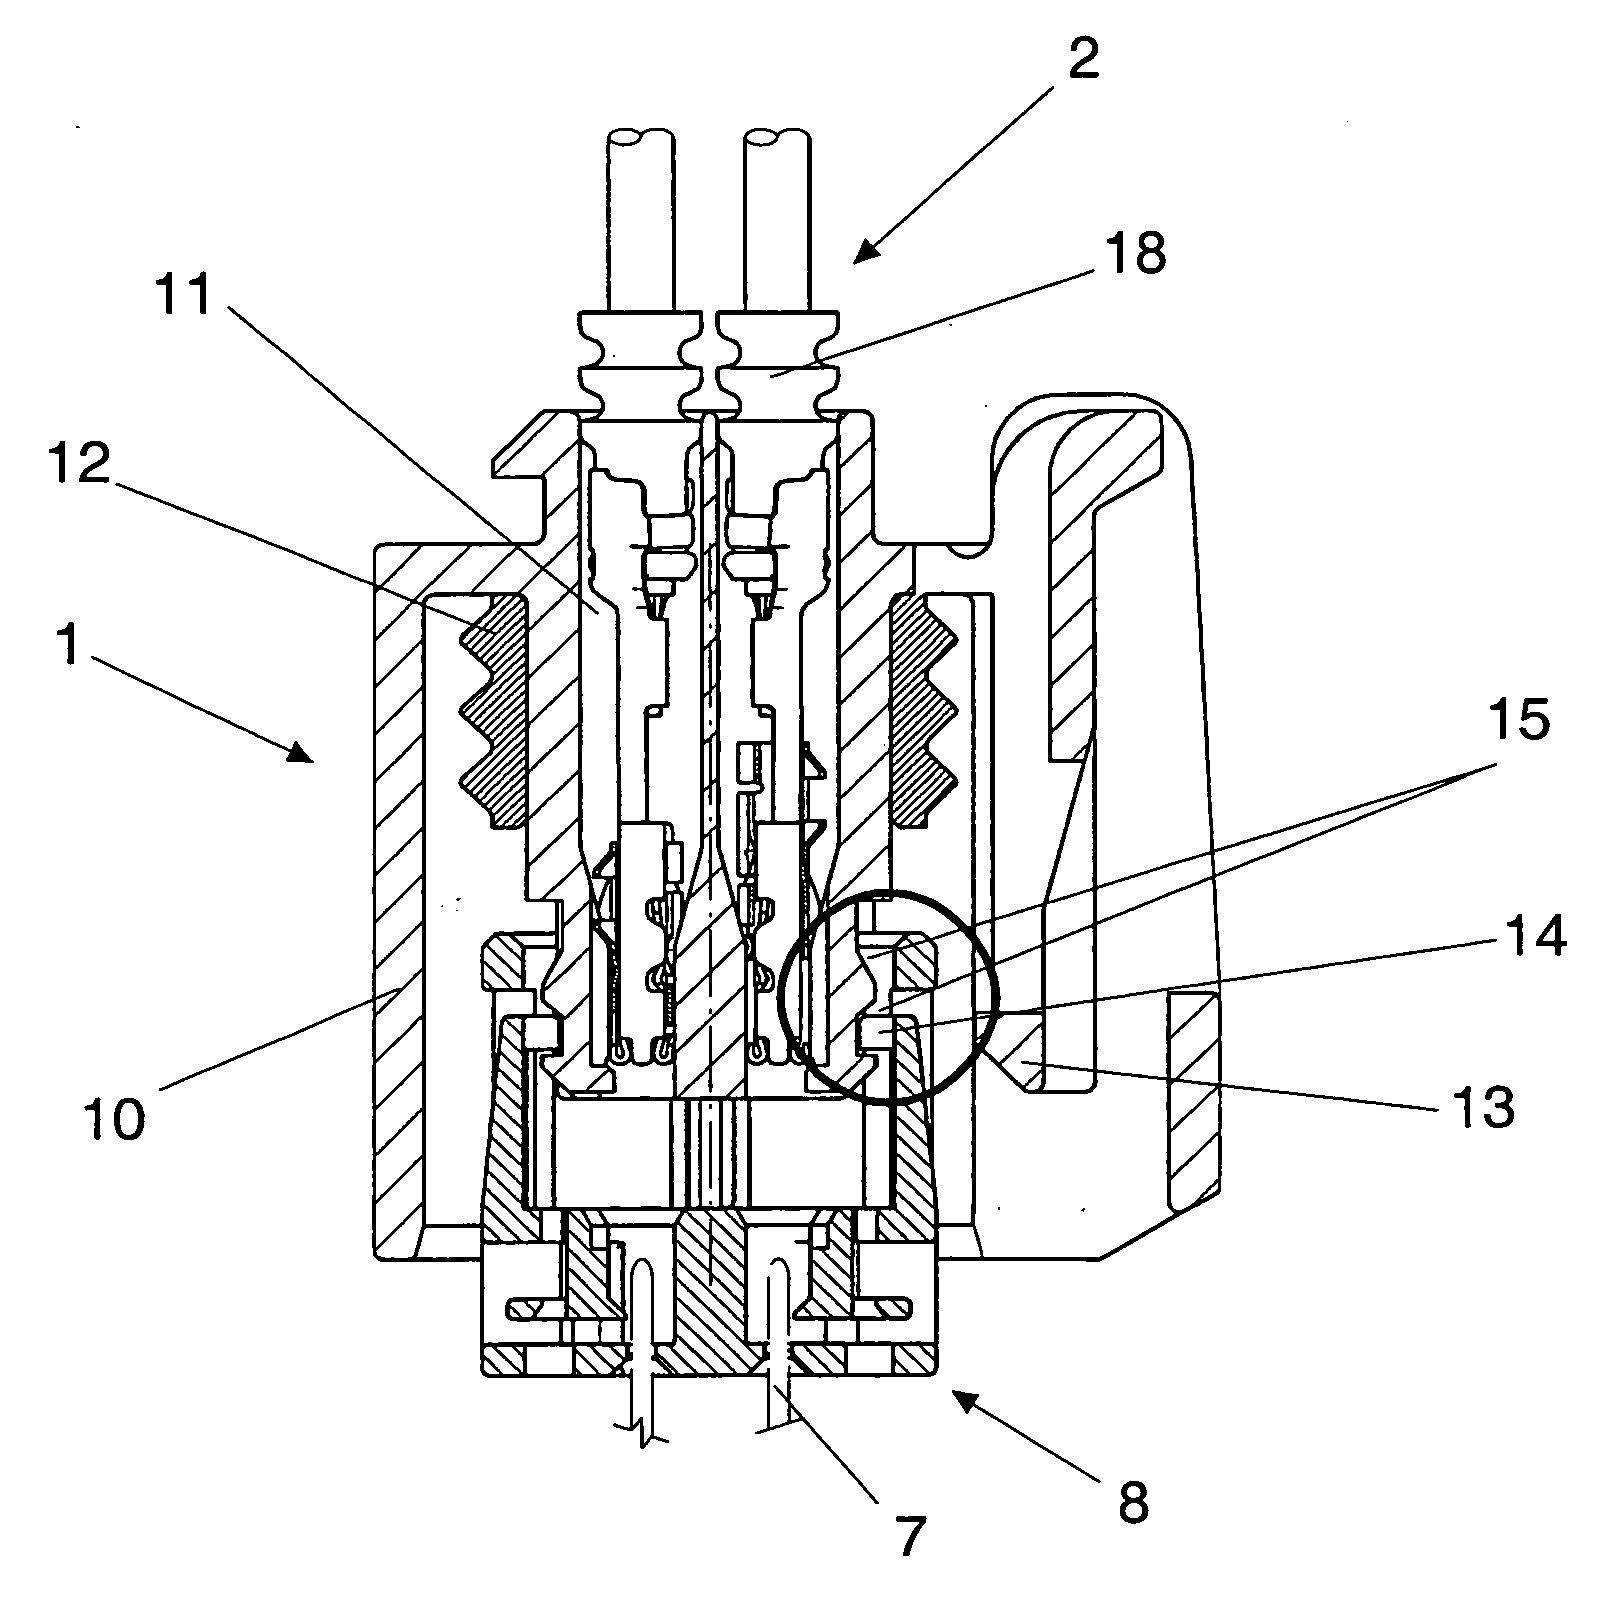 Electrical zero insertion force connector